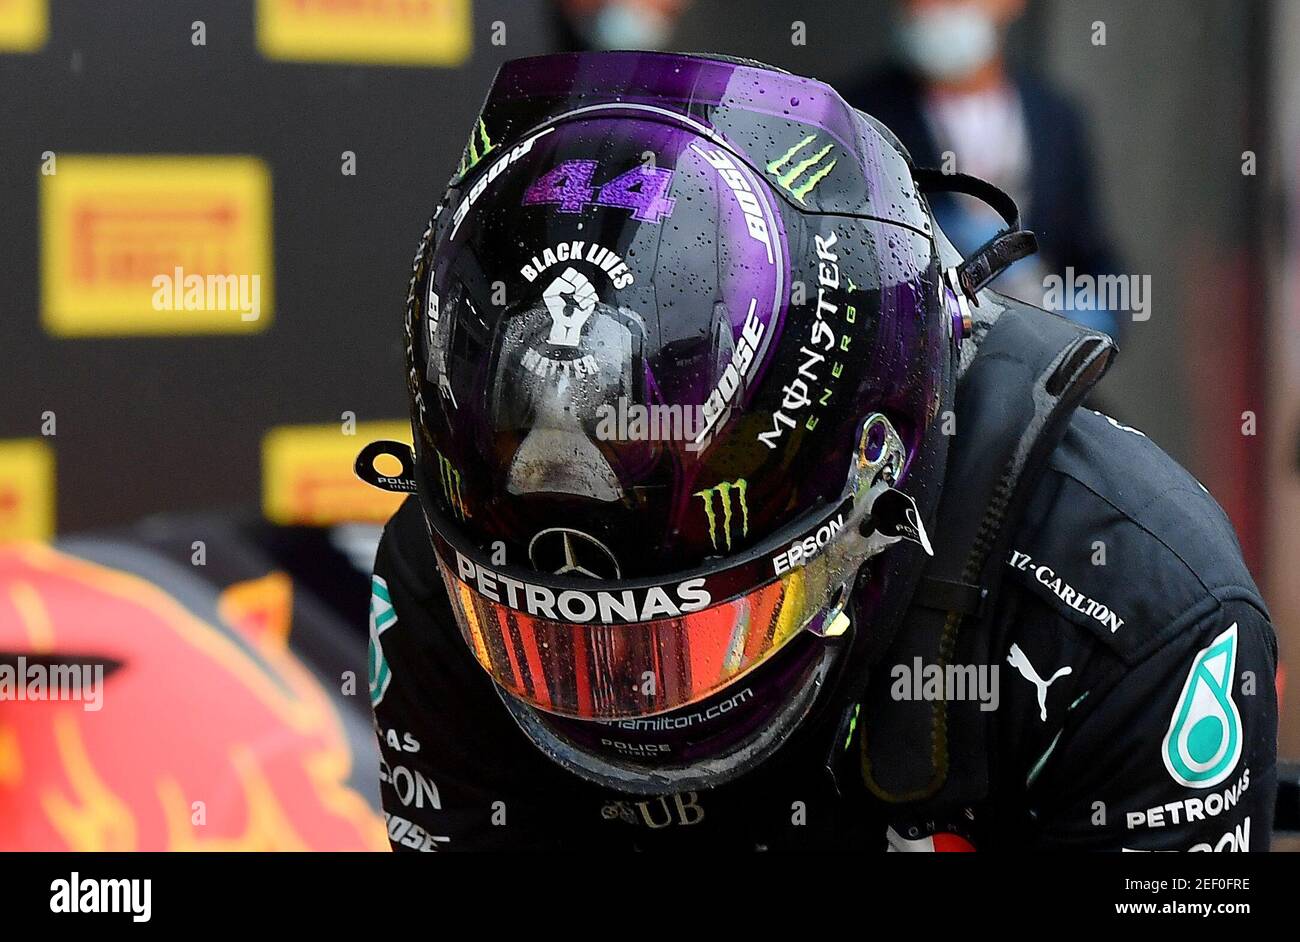 Formula One F1 - Steiermark Grand Prix - Red Bull Ring, Spielberg, Styria,  Austria - July 11, 2020 Mercedes' Lewis Hamilton with Black Lives Matter on  his helmet after qualifying in pole